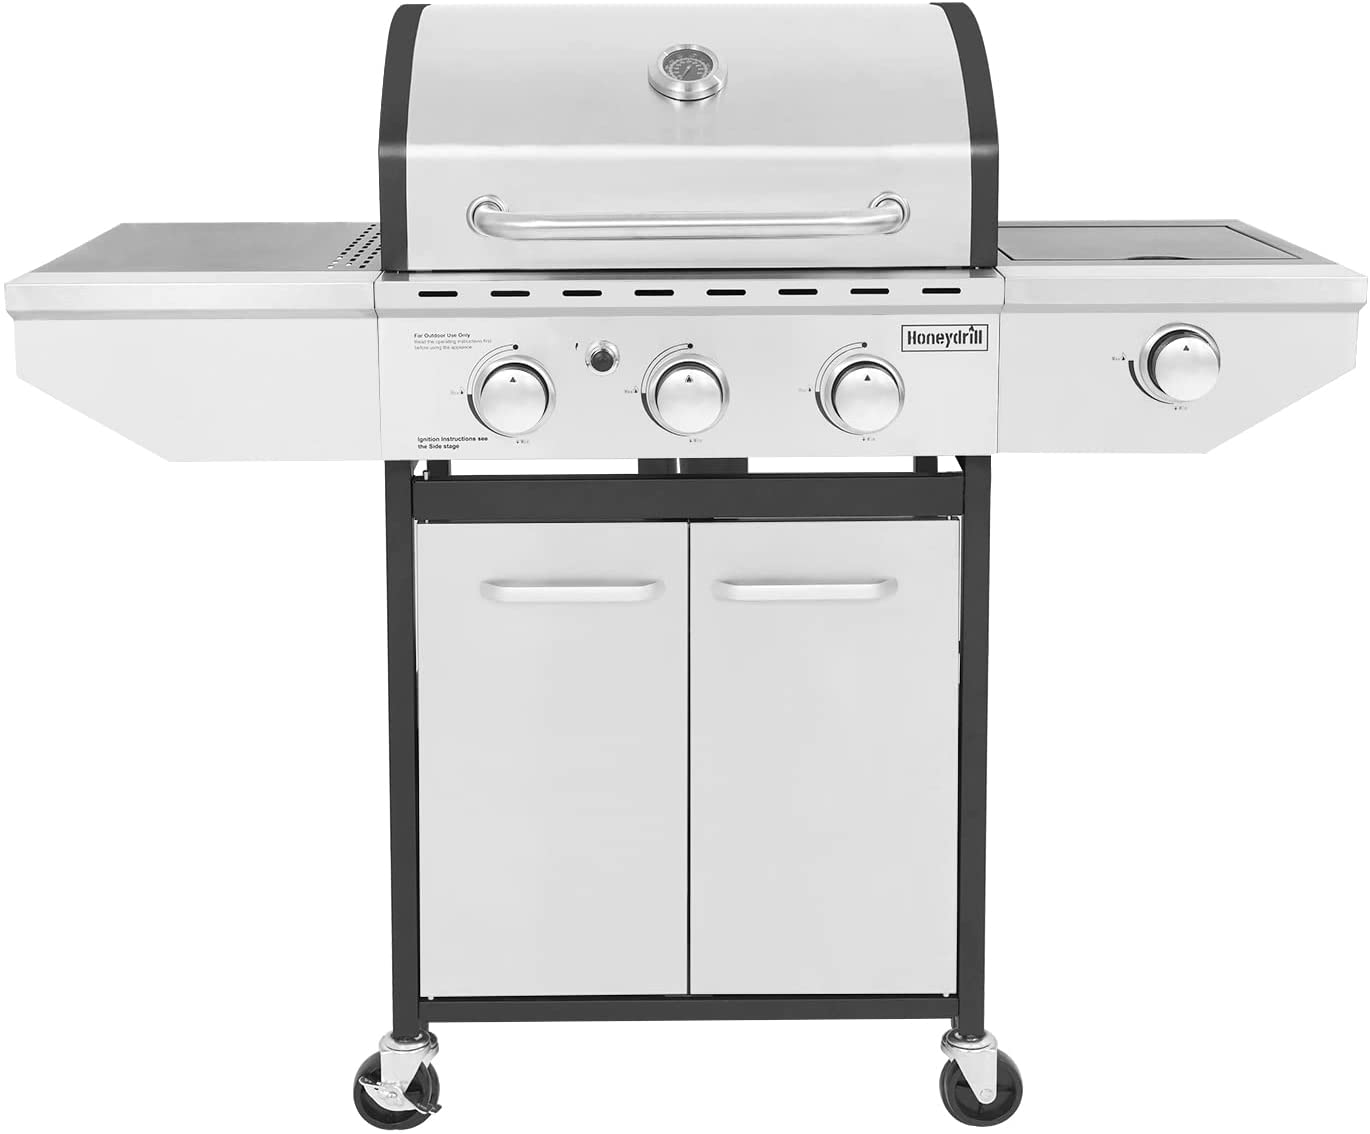 DIMAR GARDEN 3-Burner Propane Gas Grill with Side Burner, Outdoor Cabinet Grill for BBQ, Stainless Steel - image 1 of 9